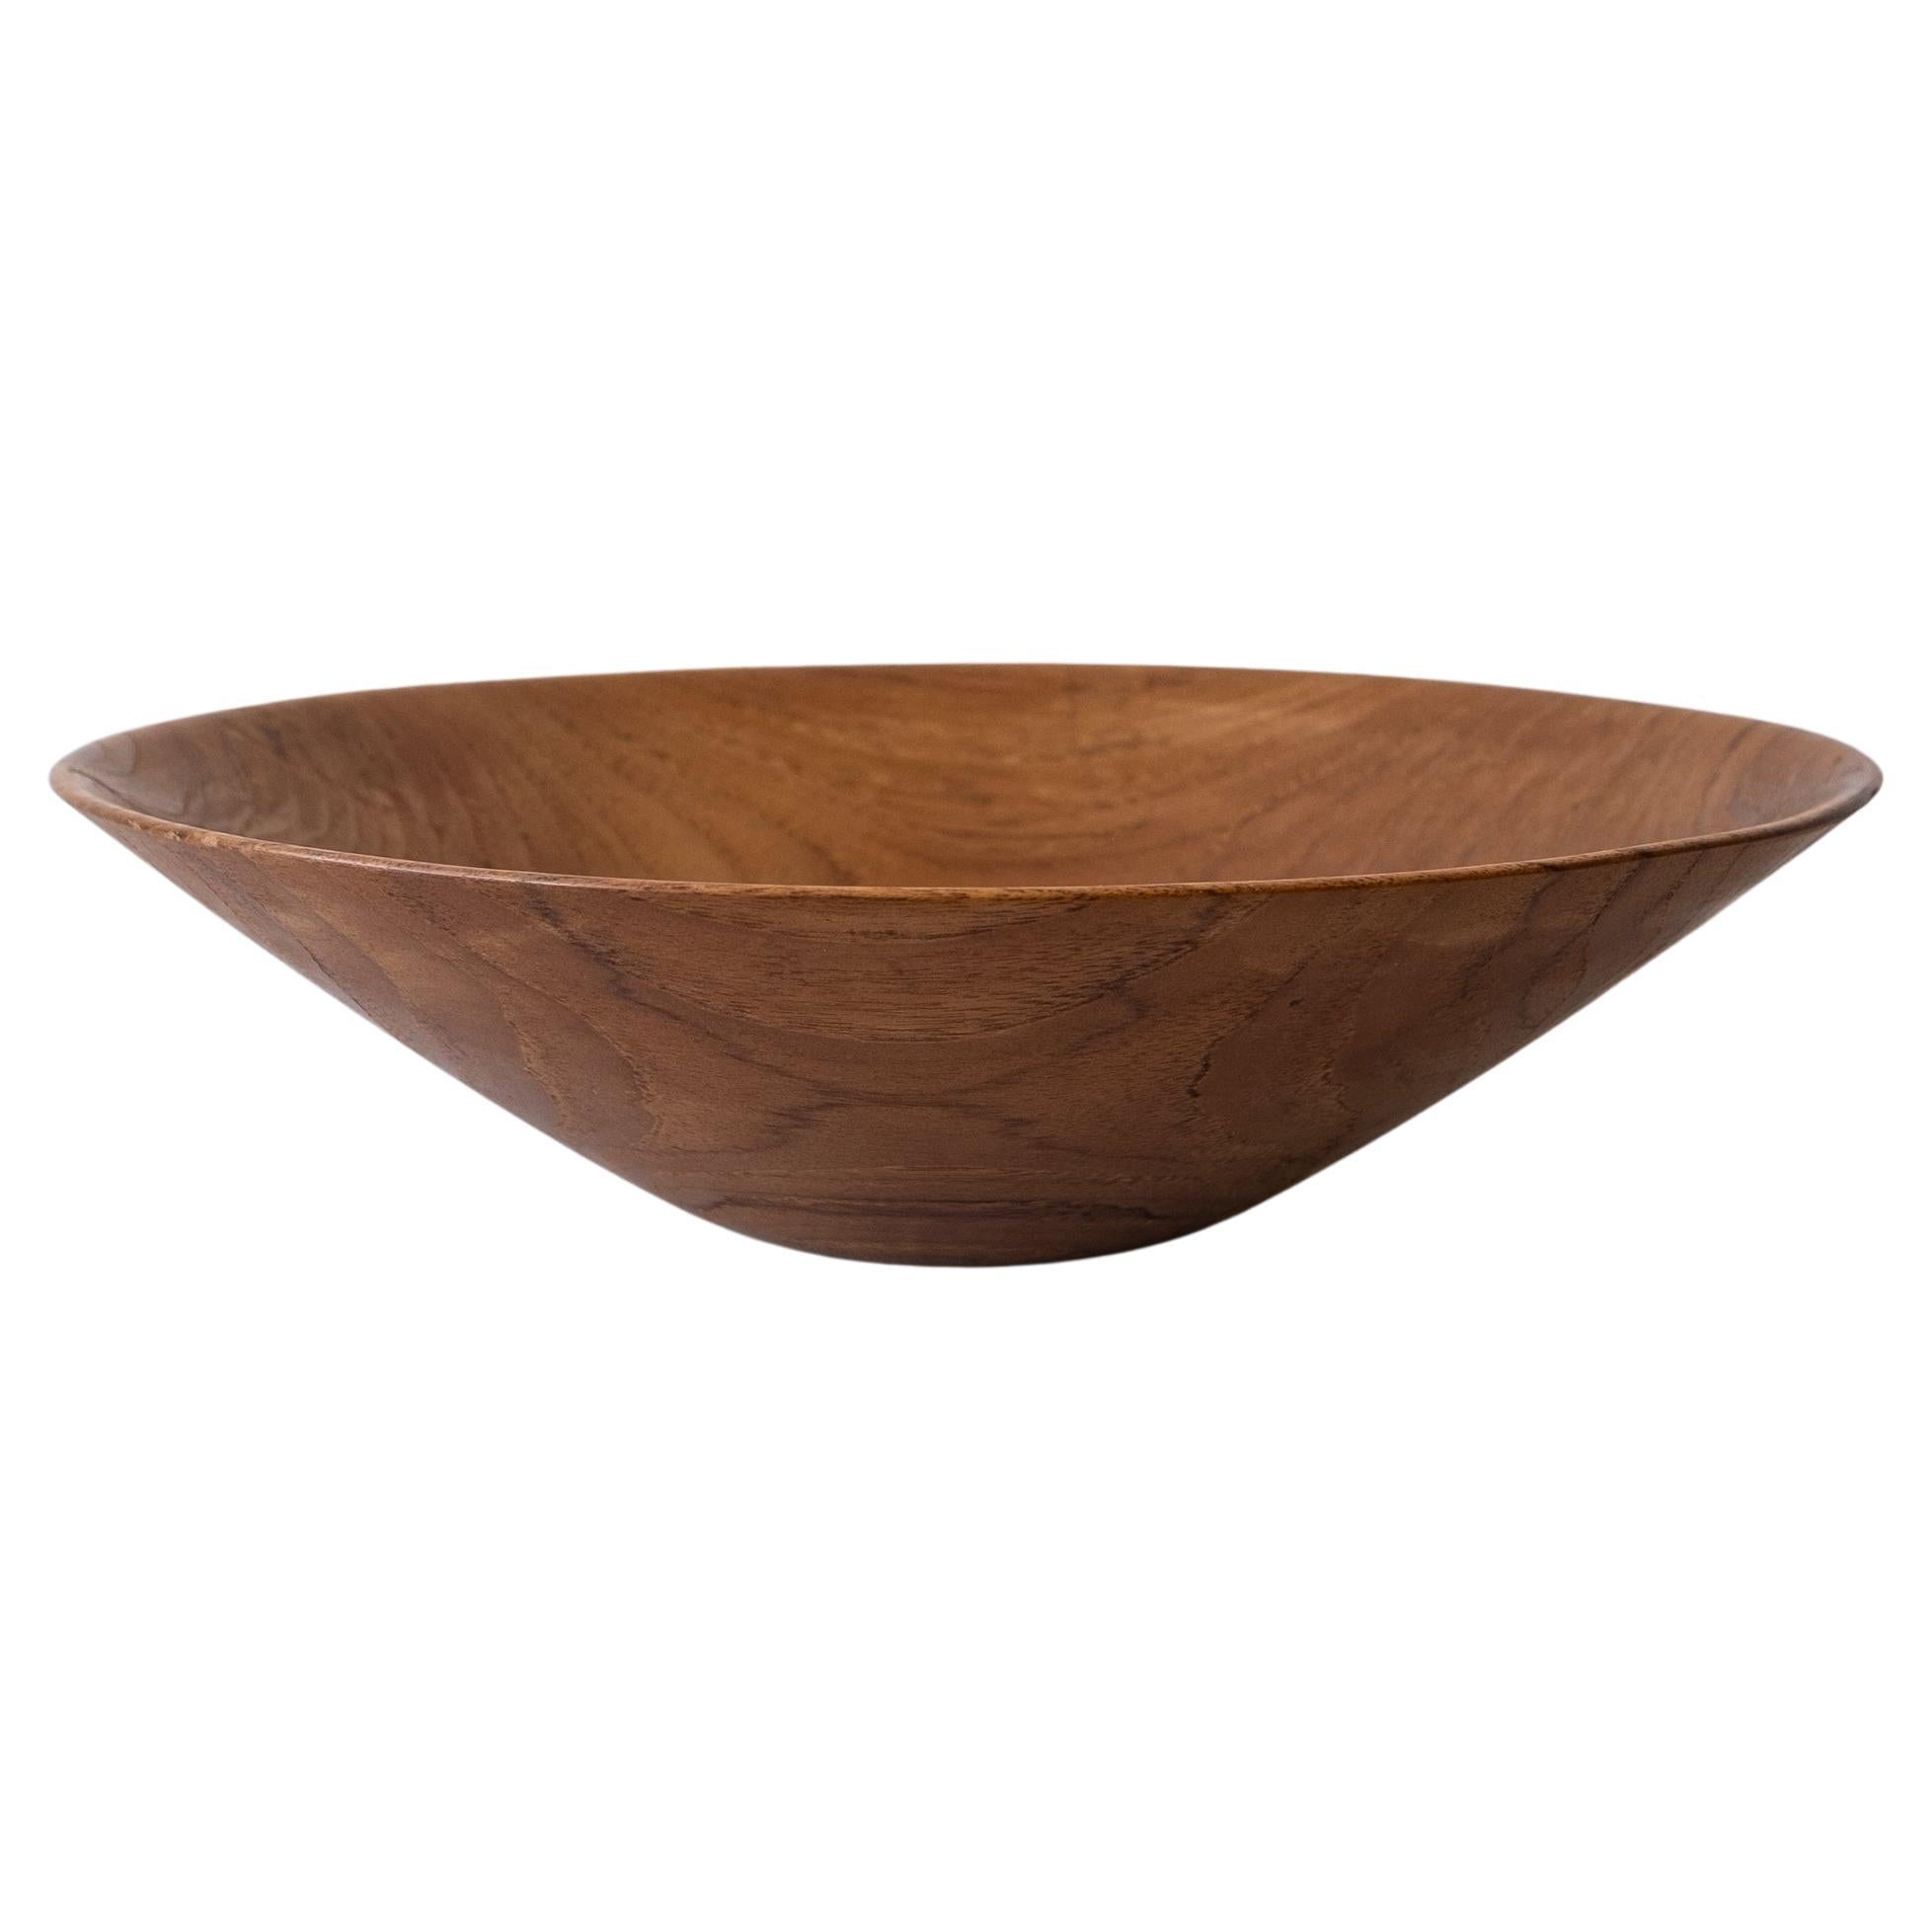 Shigemichi Aomine Modernist Japanese Wood Bowl for the National Craft Council